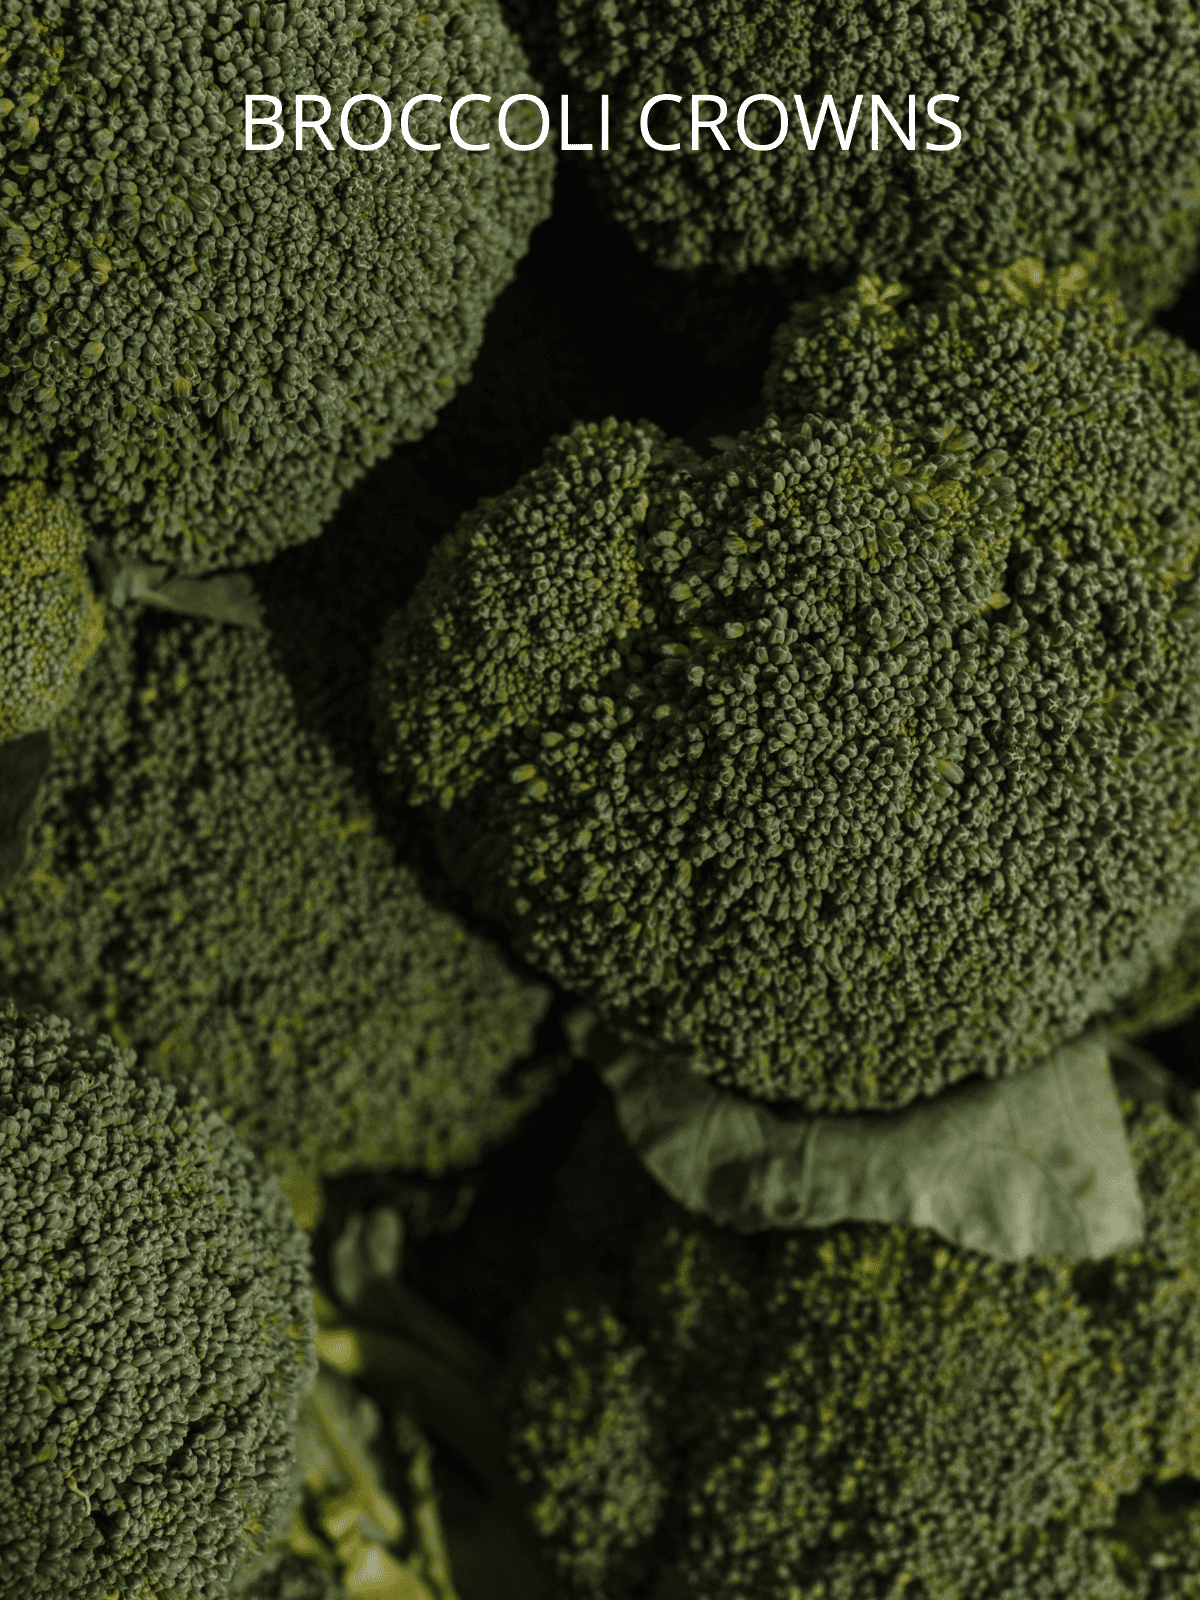 The top crowns of head of broccoli.